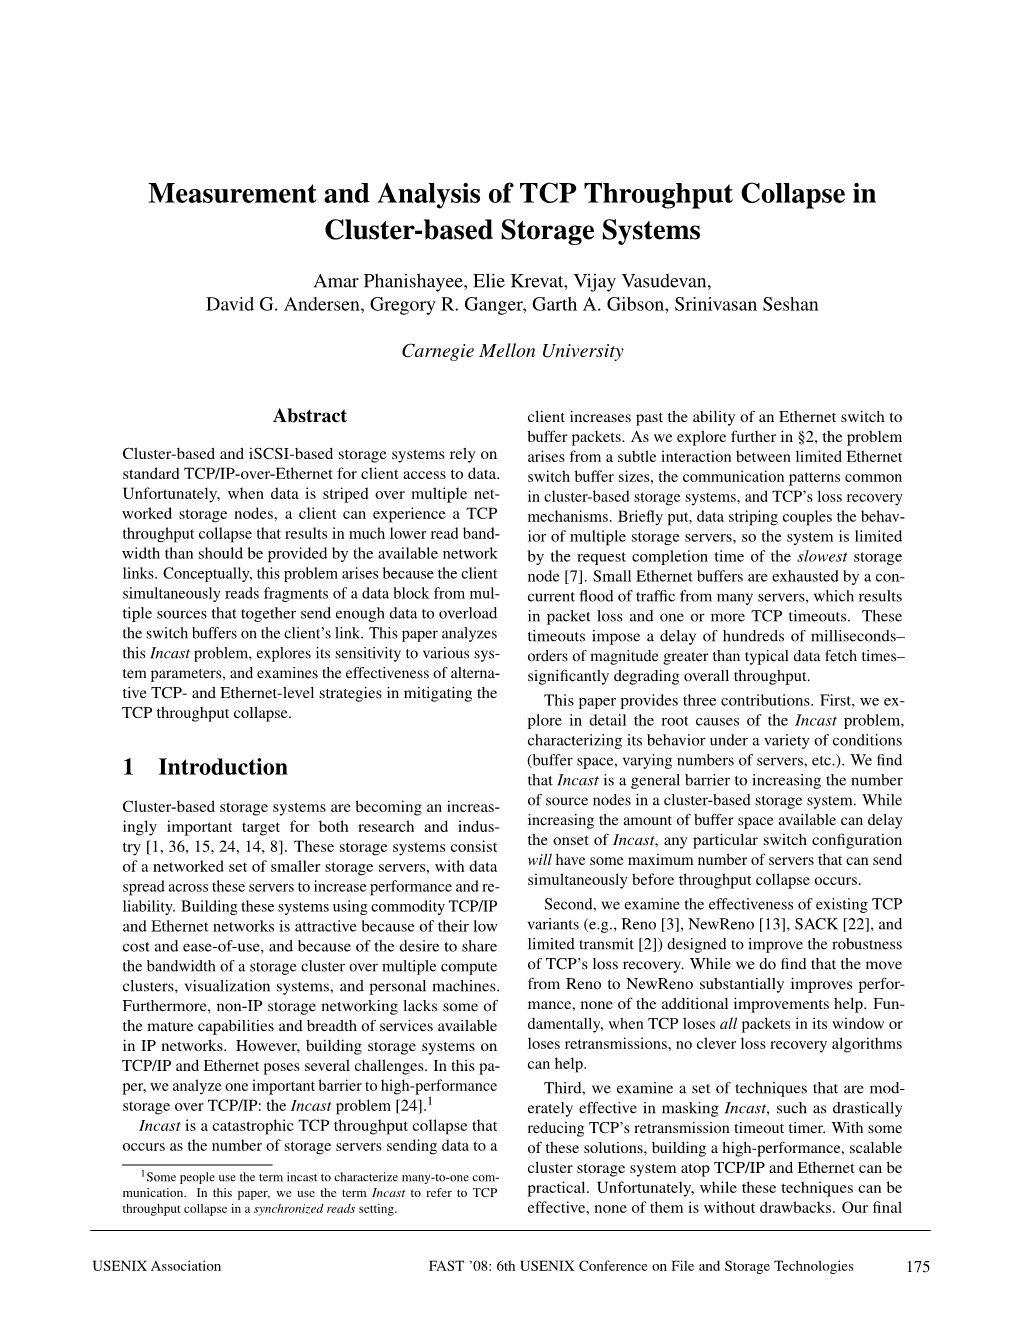 Measurement and Analysis of TCP Throughput Collapse in Cluster-Based Storage Systems